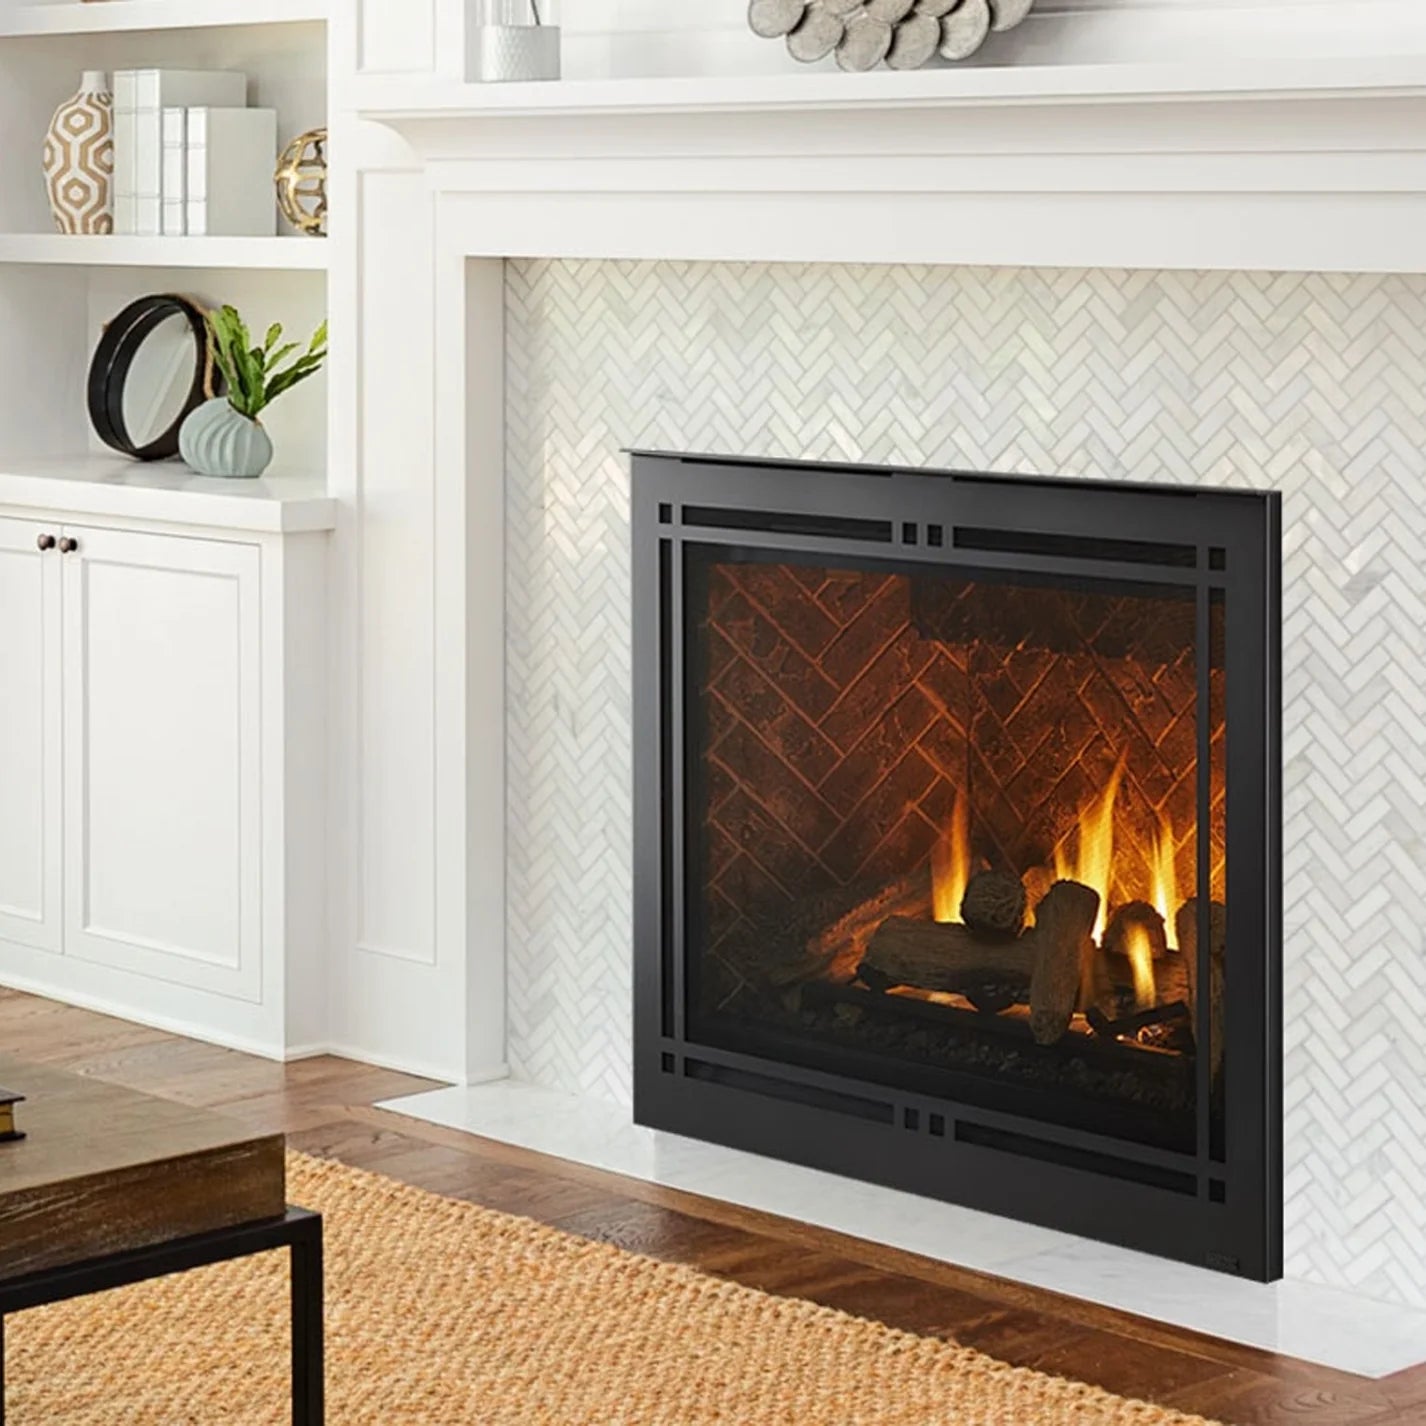 Majestic Meridian 36 Direct Vent Gas Fireplace - MER36